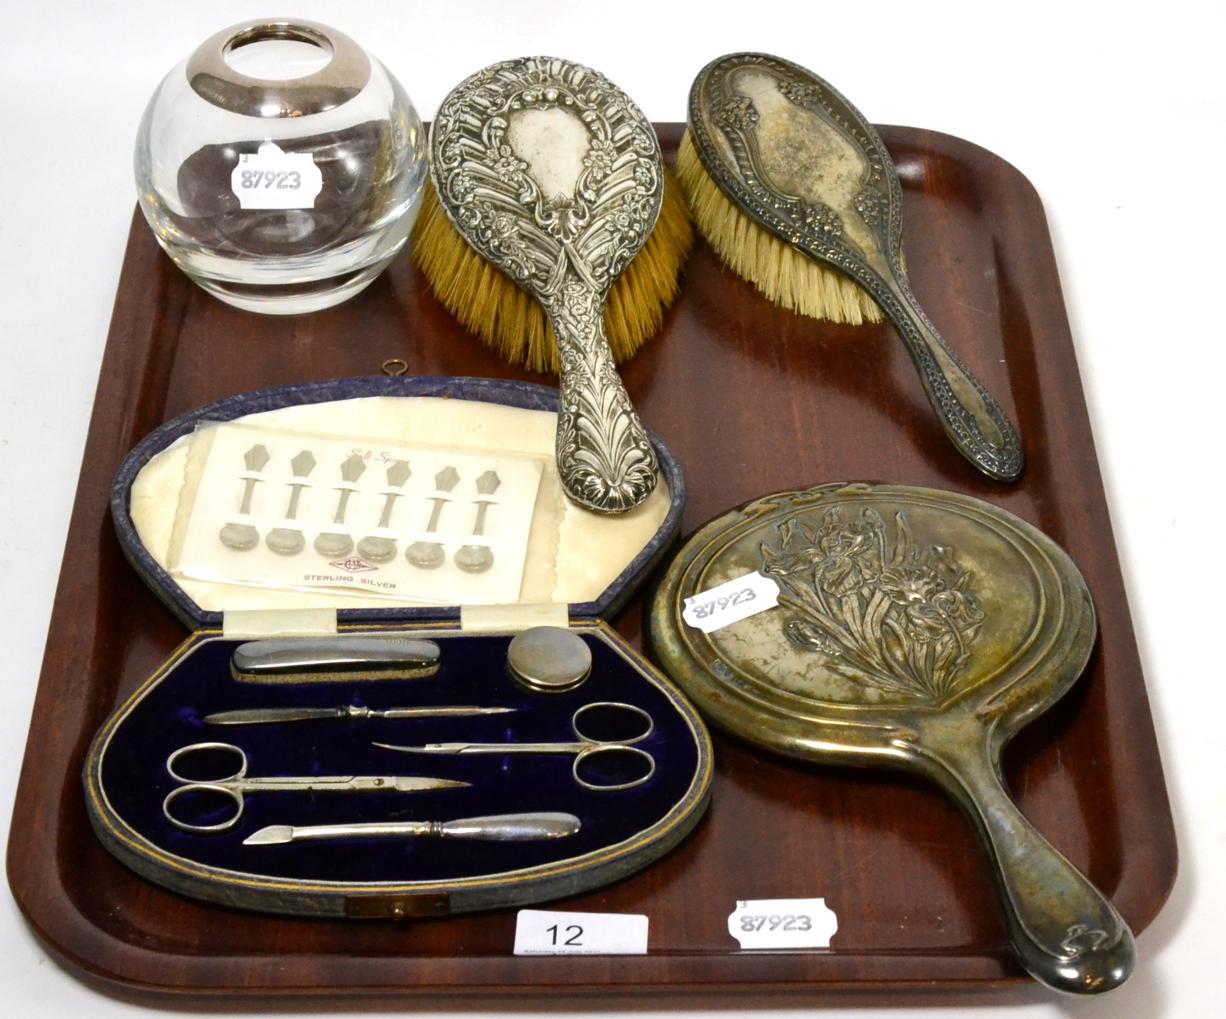 An Asprey & Co, London, silver mounted hair tidy toy with various silver backed dressing table items